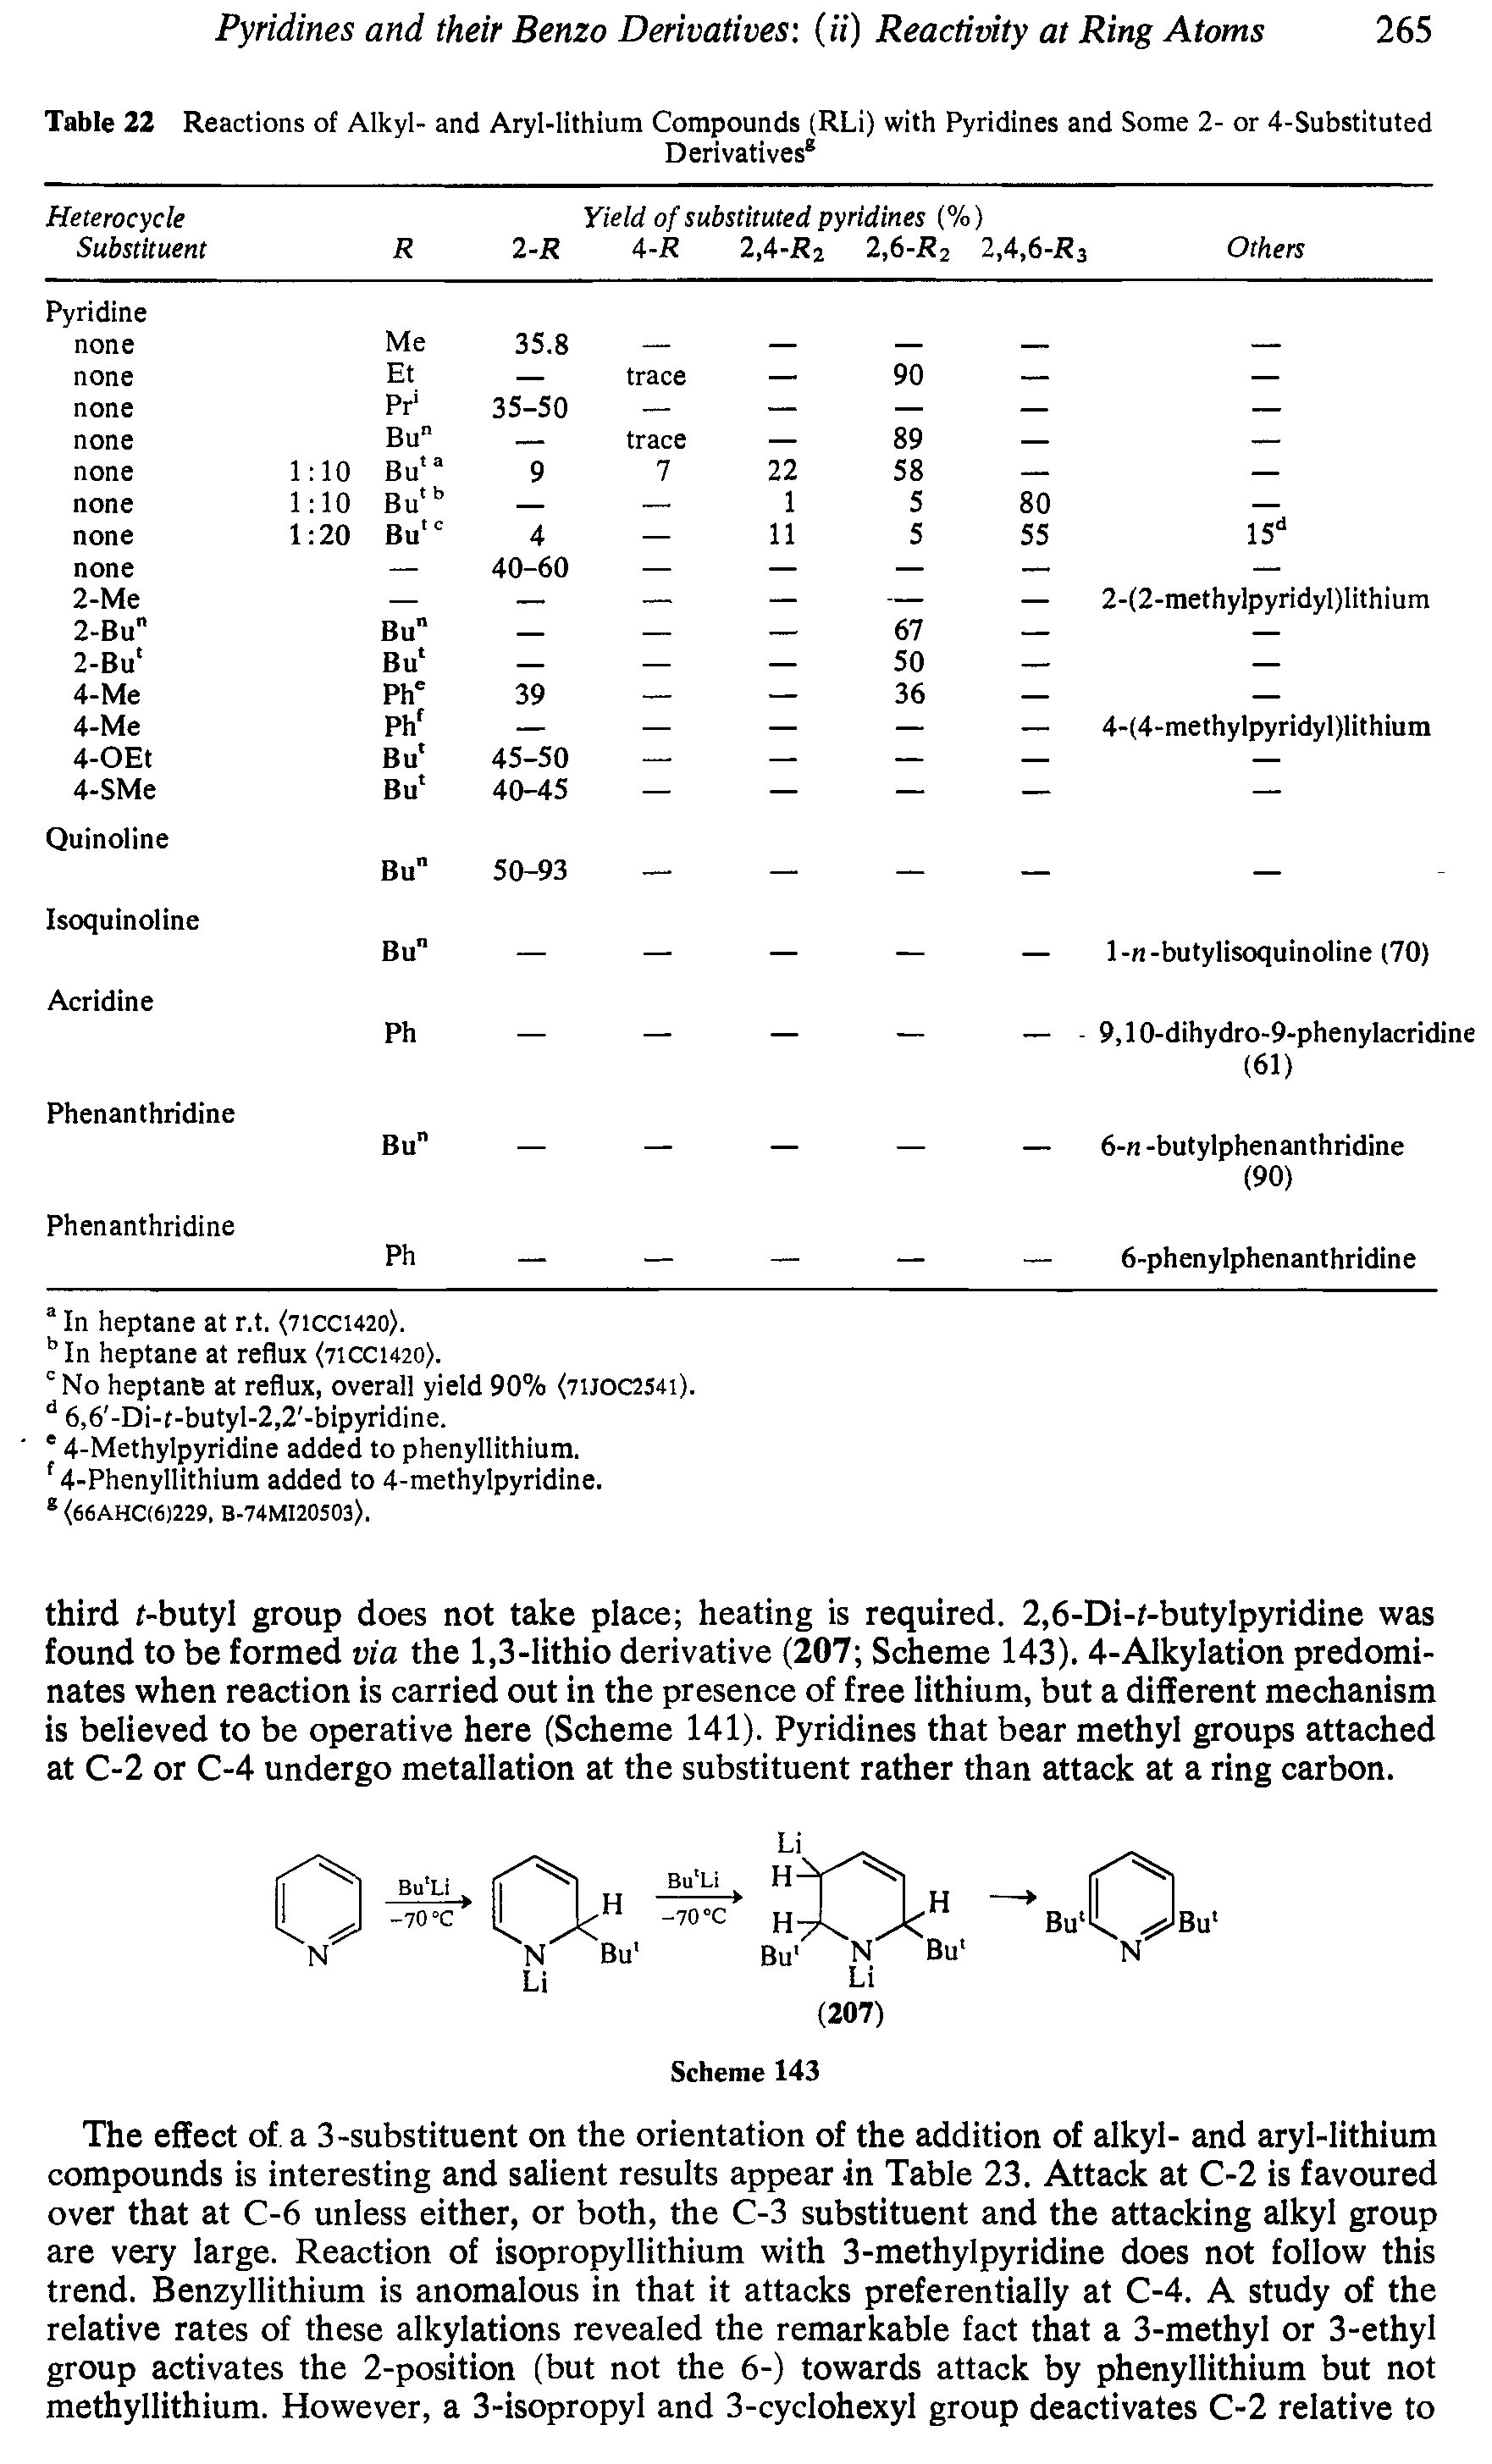 Table 22 Reactions of Alkyl- and Aryl-lithium Compounds (RLi) with Pyridines and Some 2- or 4-Substituted...